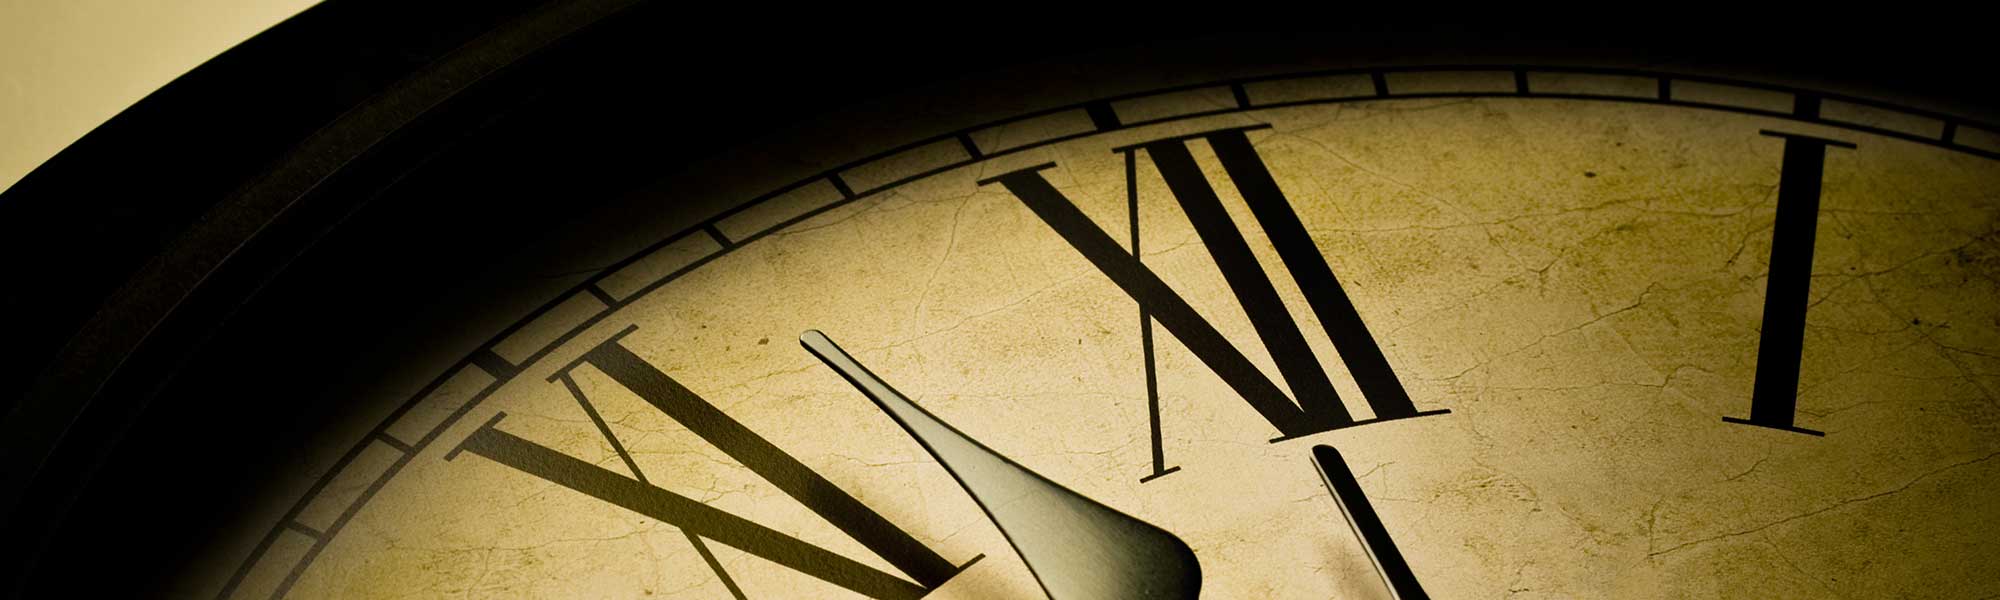 A close up picture of a clock face